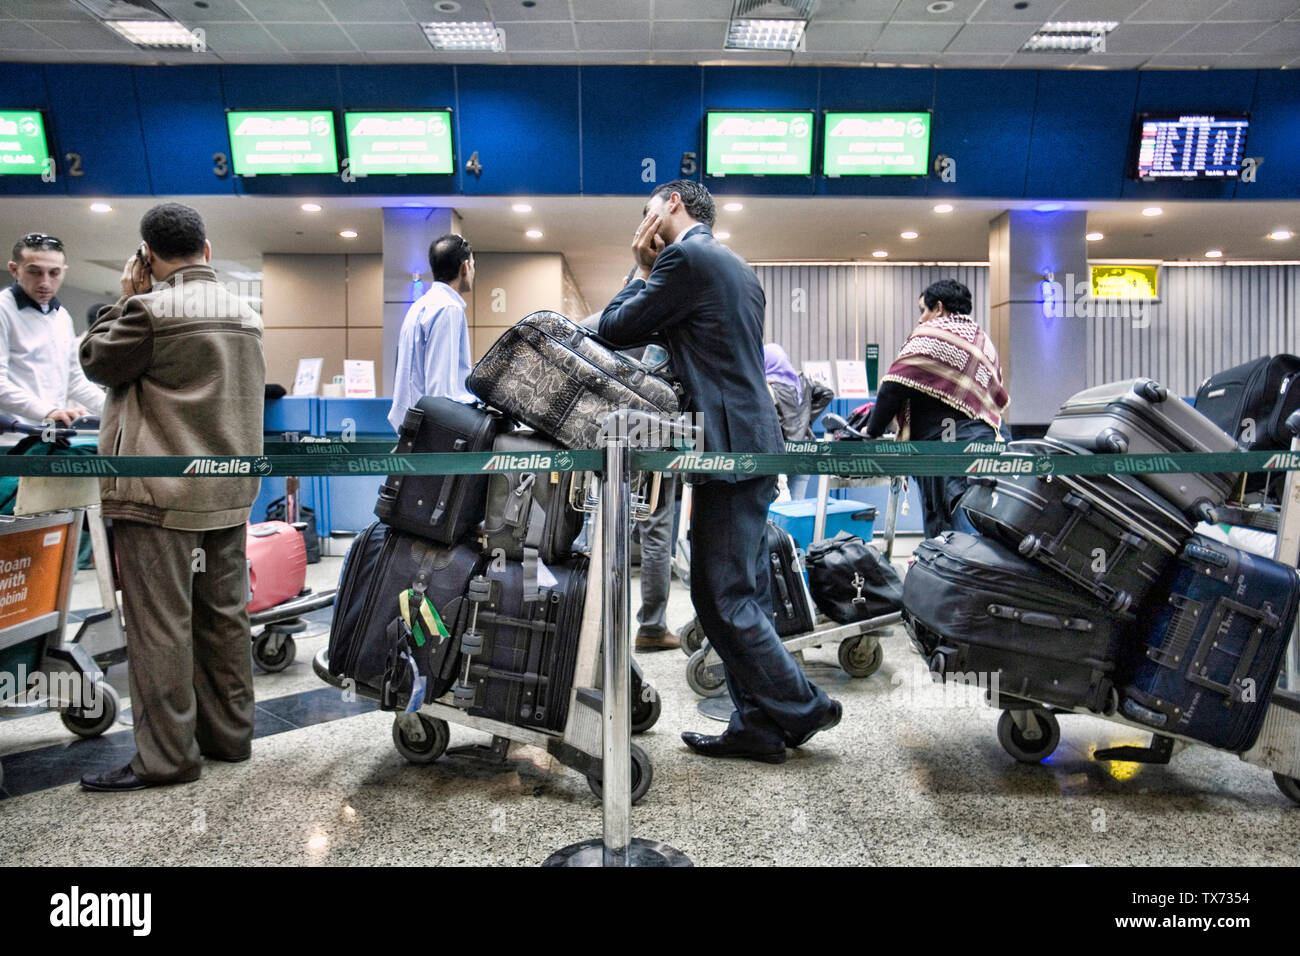 People queuing to check-in luggages at Cairo airport Stock Photo